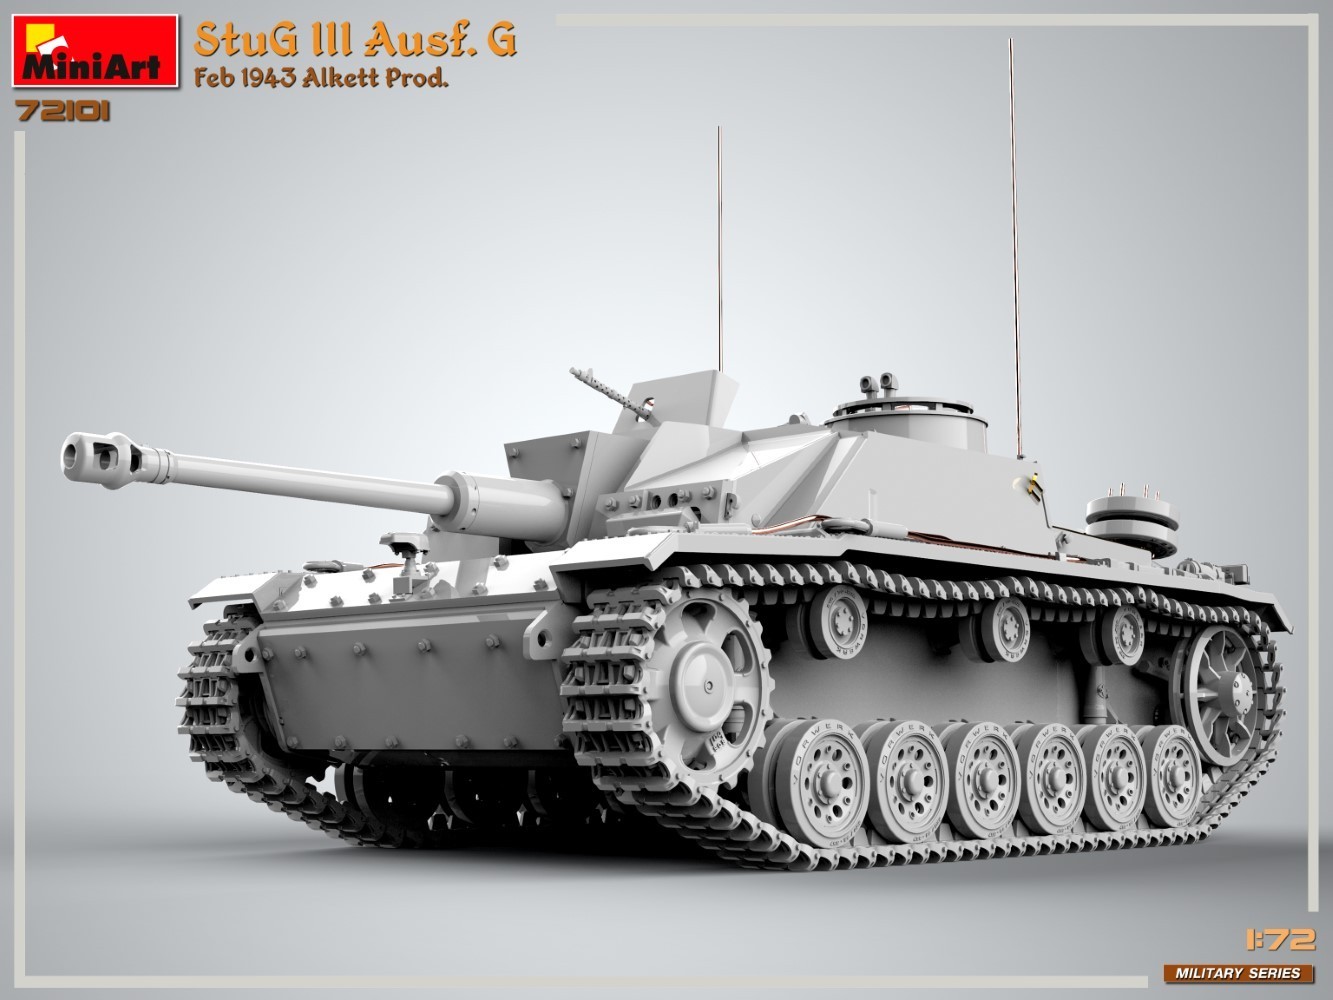 New Military Series Announced in 1/72 Scale, Starting with StuG III Ausf. G CAD-7